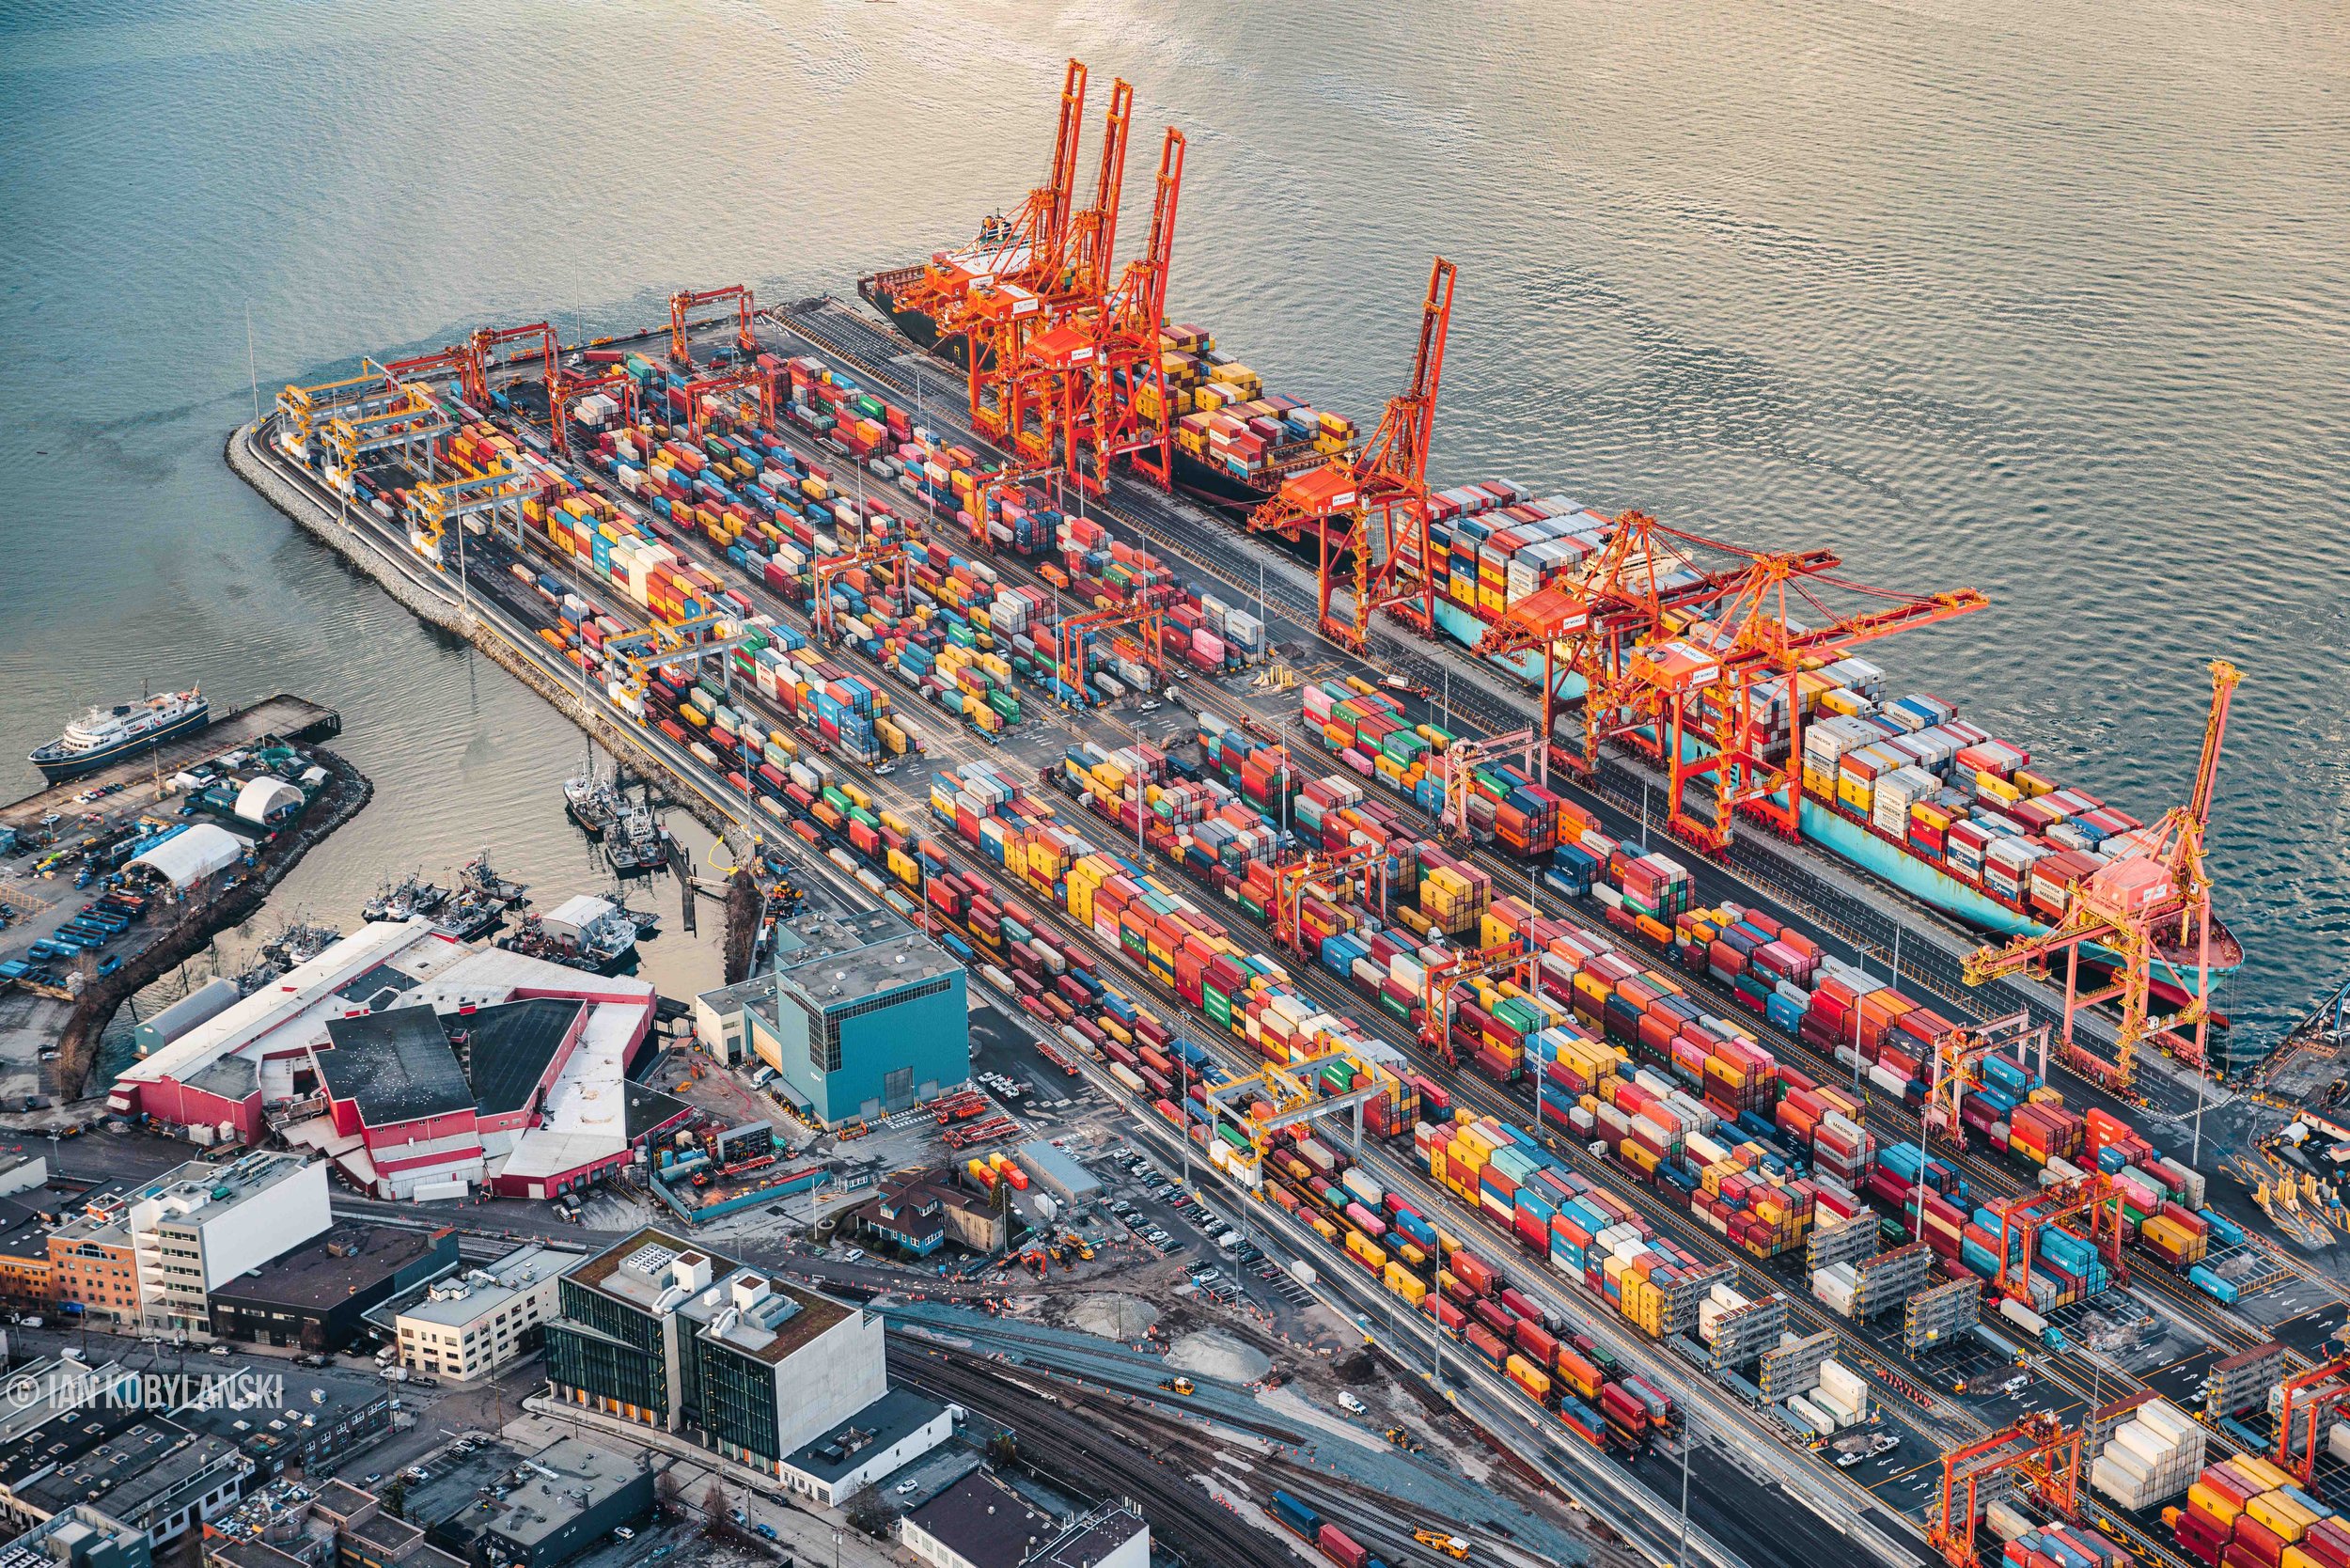   “Port of Vancouver Shipyards” . Like pieces of lego, each container is filled with all the items we use every day. Bound for corners around North America, Vancouver’s port is the second larger port on the West Coast of our continent. Each container